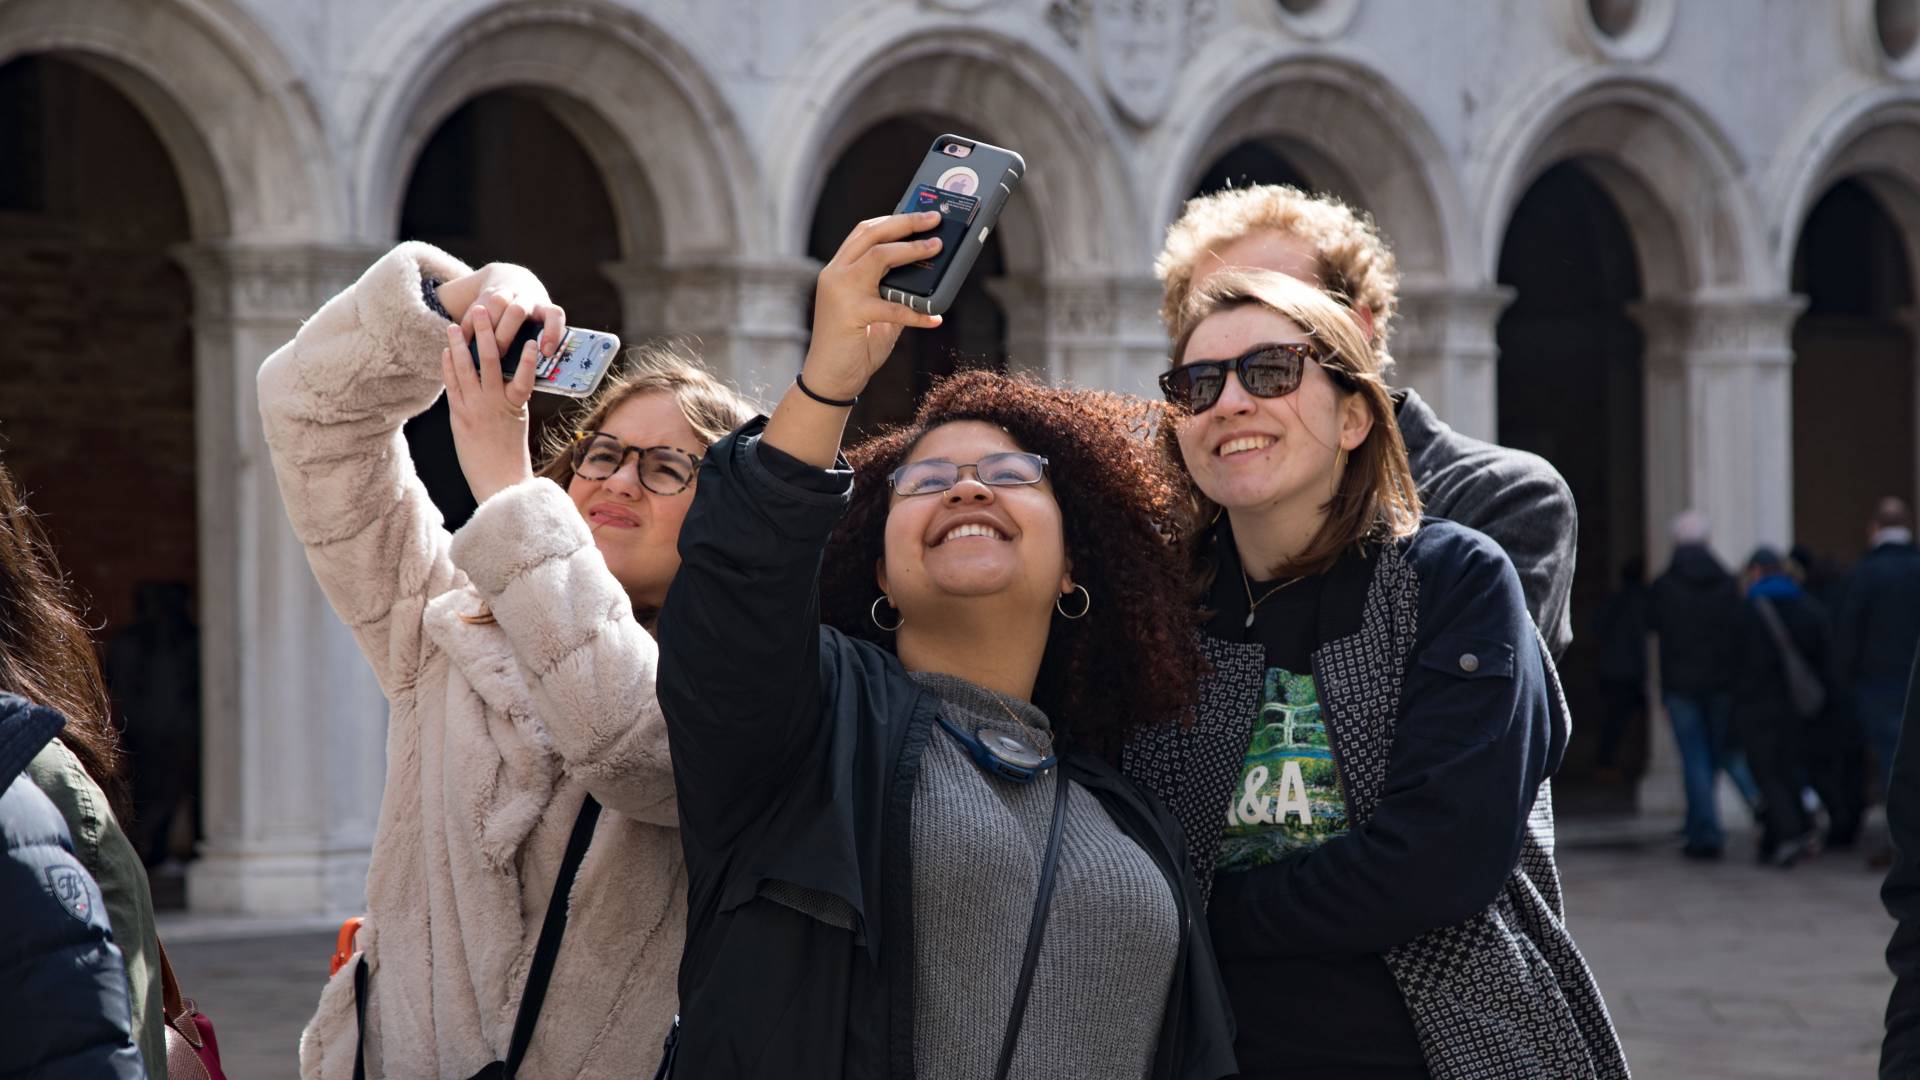 Students taking selfies outside the Doge's Palace in Venice